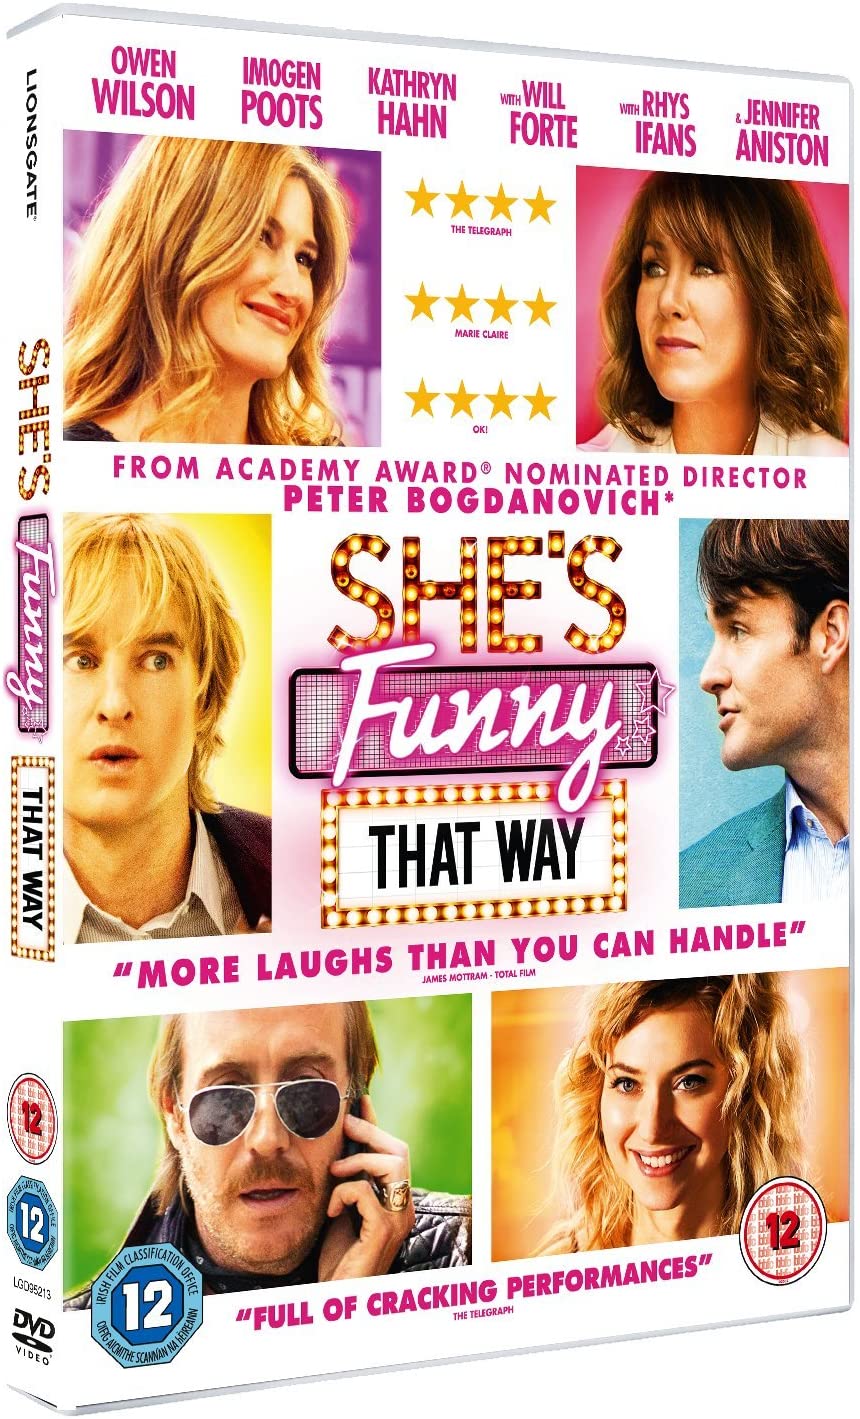 She's Funny That Way [2017] - Romance, Comedy [DVD]